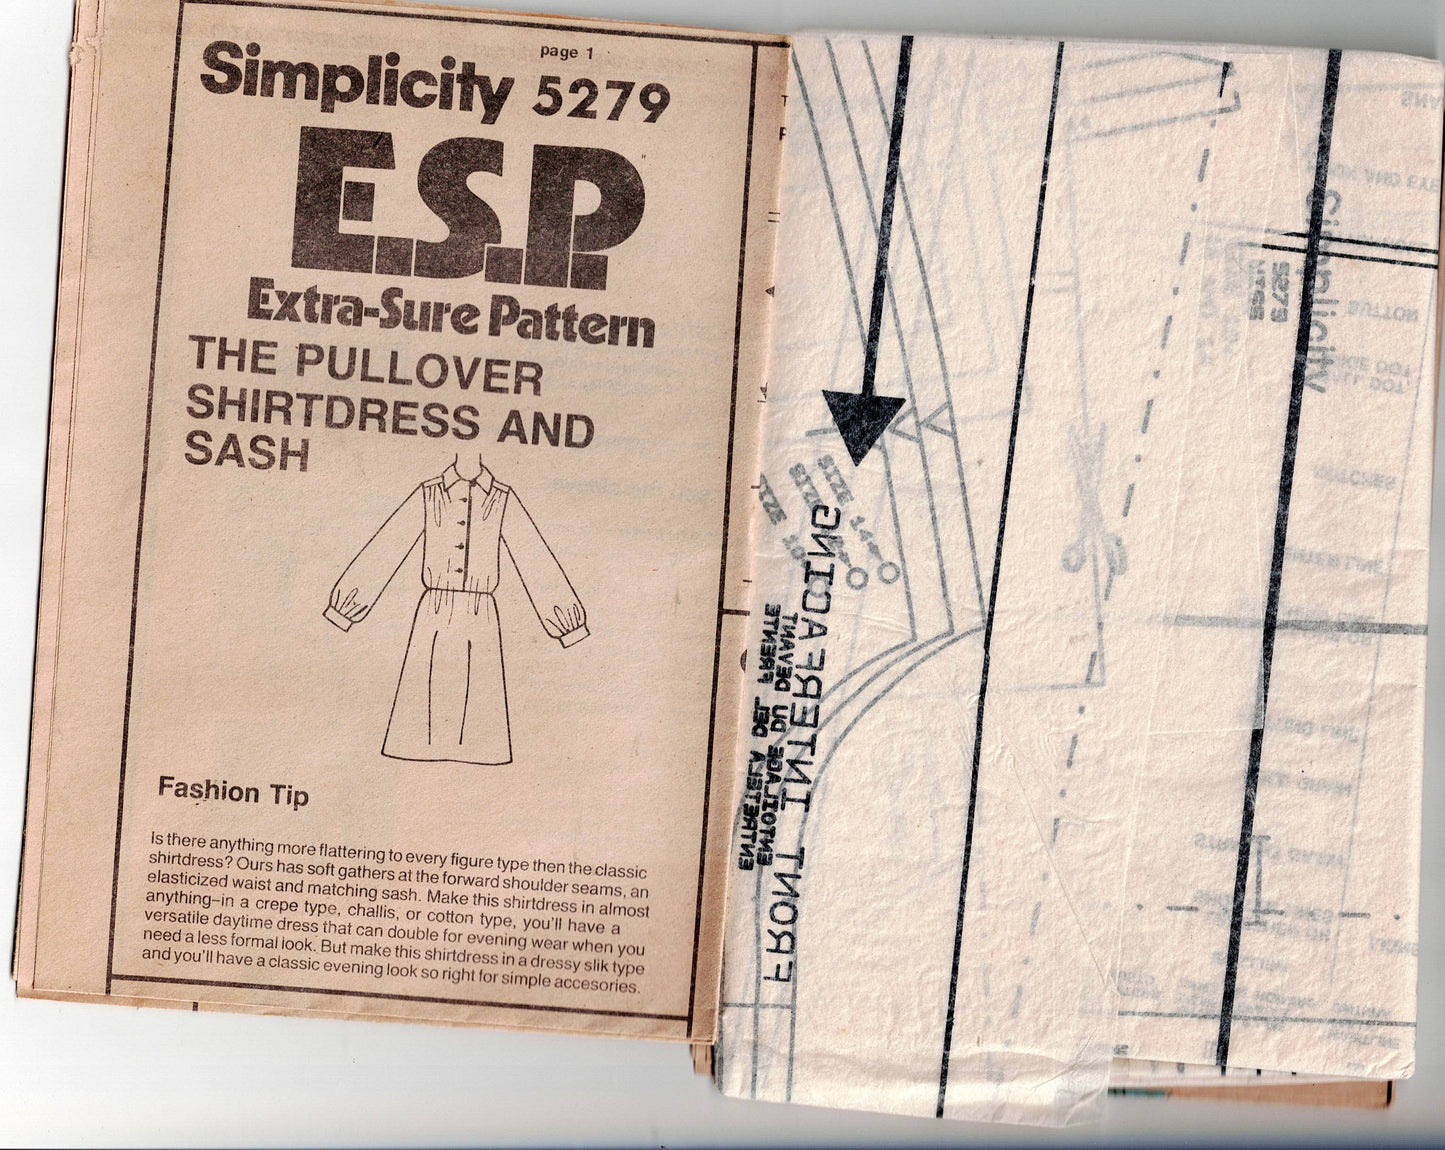 Simplicity 5279 Womens EASY Shirtdress with Pockets 1980s Vintage Sewing Pattern Size 10 - 14 UNCUT Factory Folded